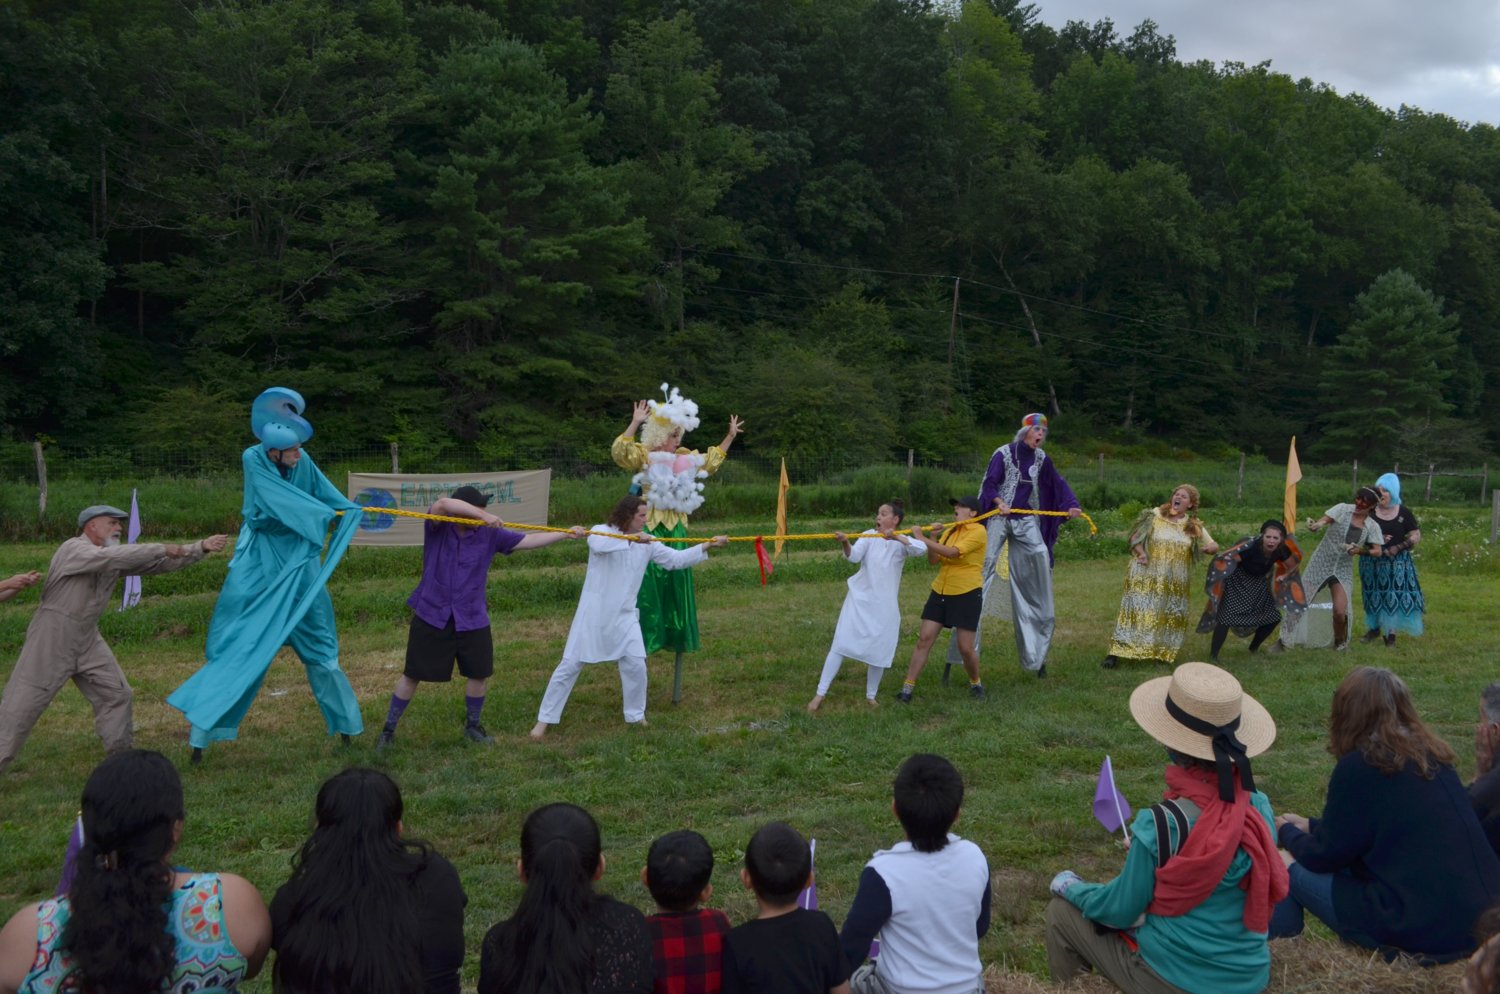 A tug of war between macrocosmic and microcosmic forces, a feature of the halftime "Earthbowl."